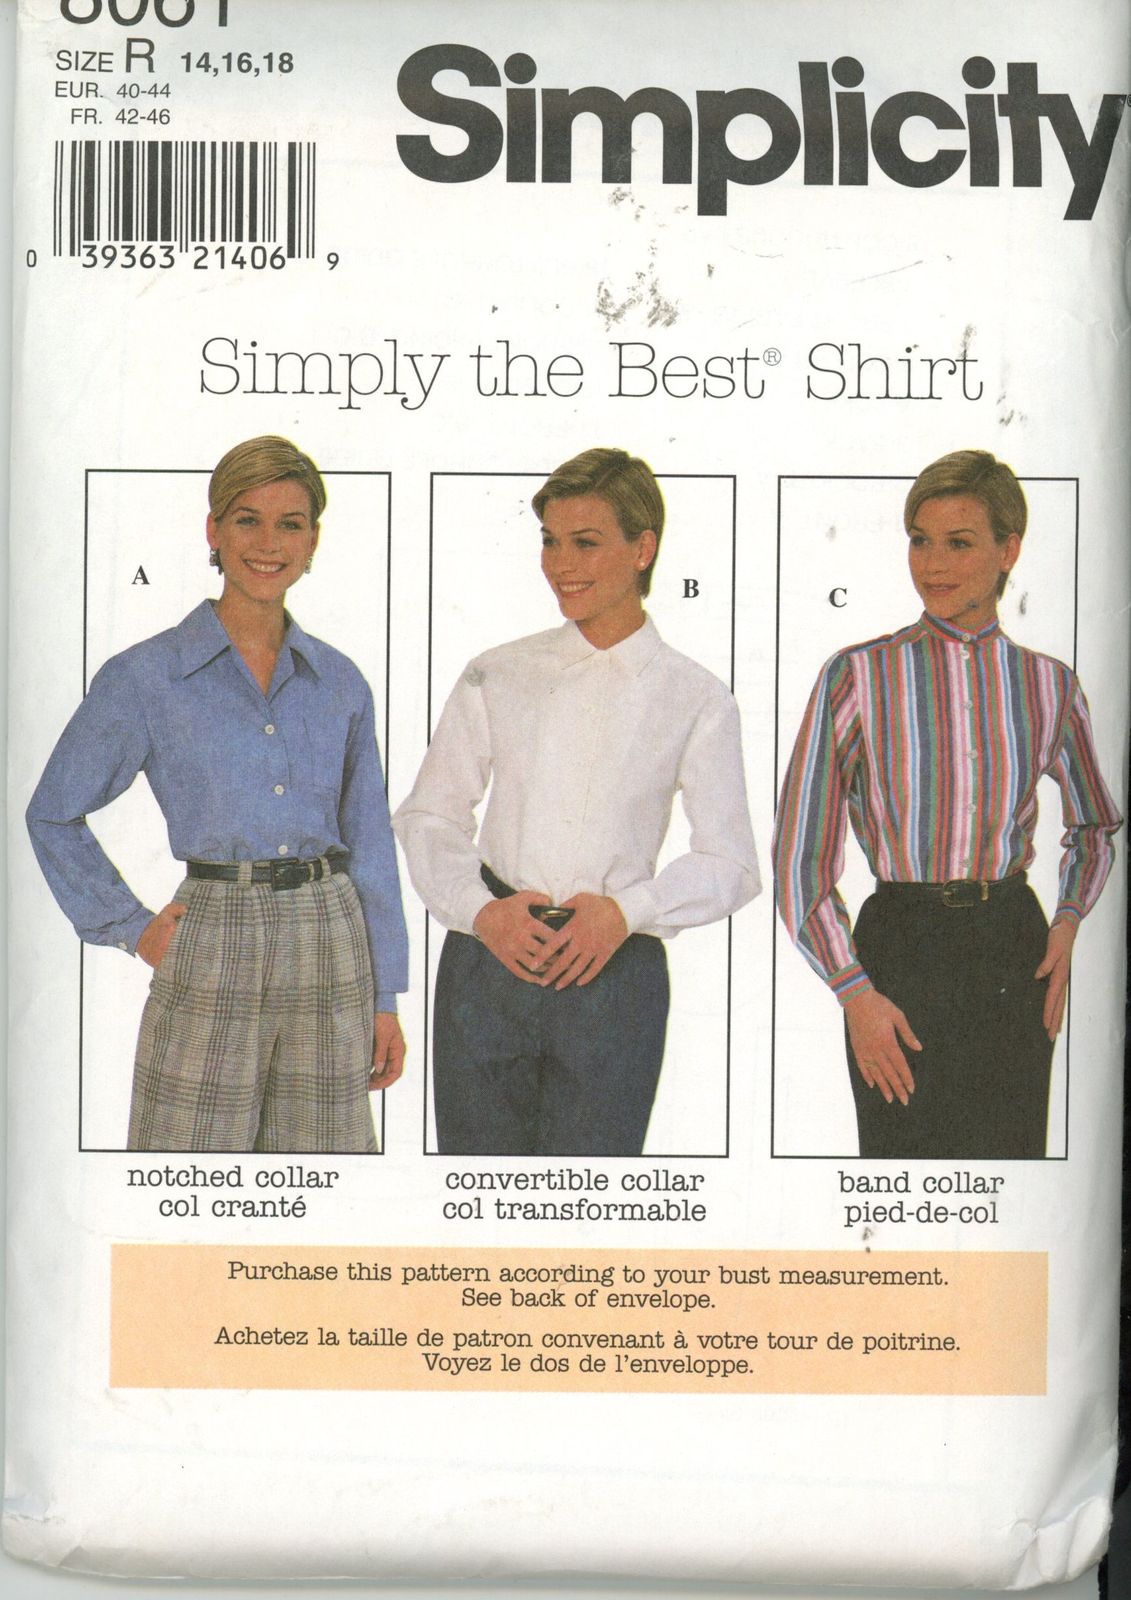 Simplicity 8061 Misses Shirt with variations - Size 14, 16, 18  UNCUT - $4.00